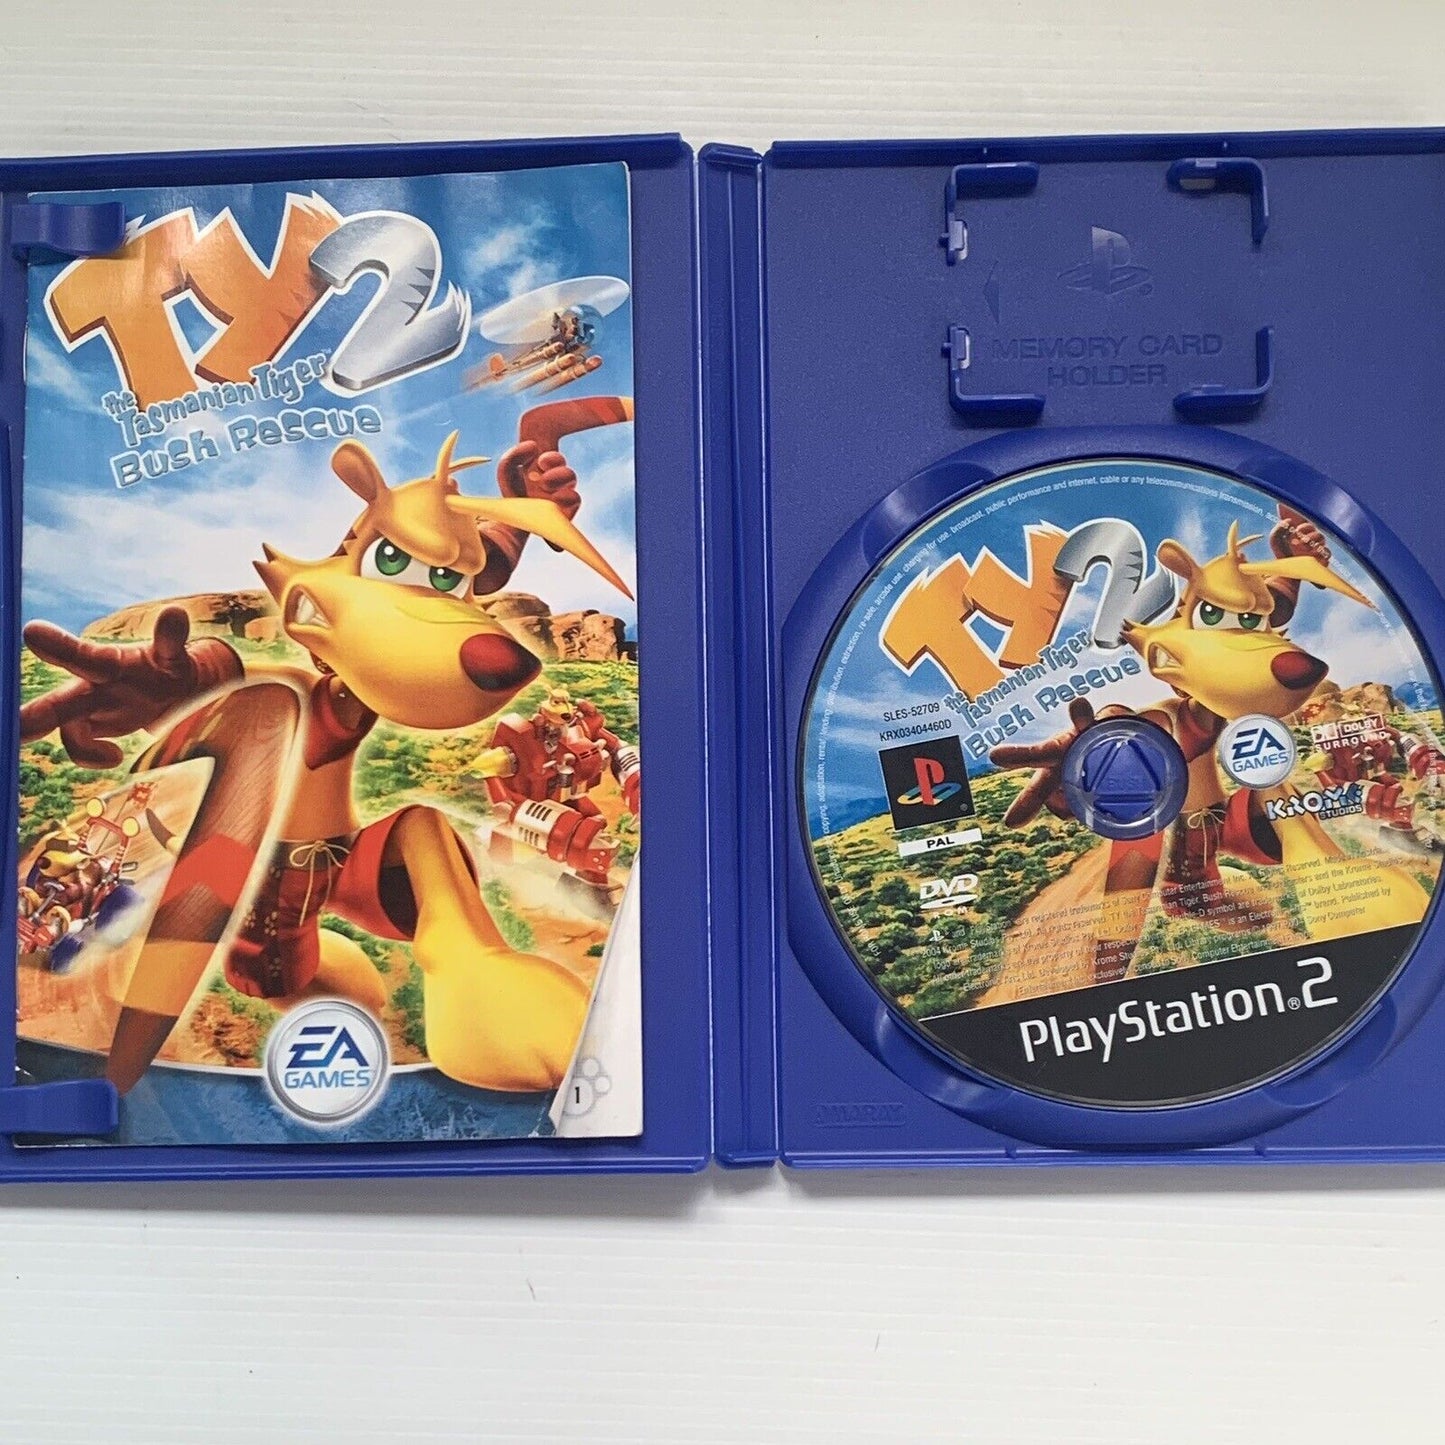 TY 2 The Tasmanian Tiger Bush Rescue PlayStation 2 PS2 Game